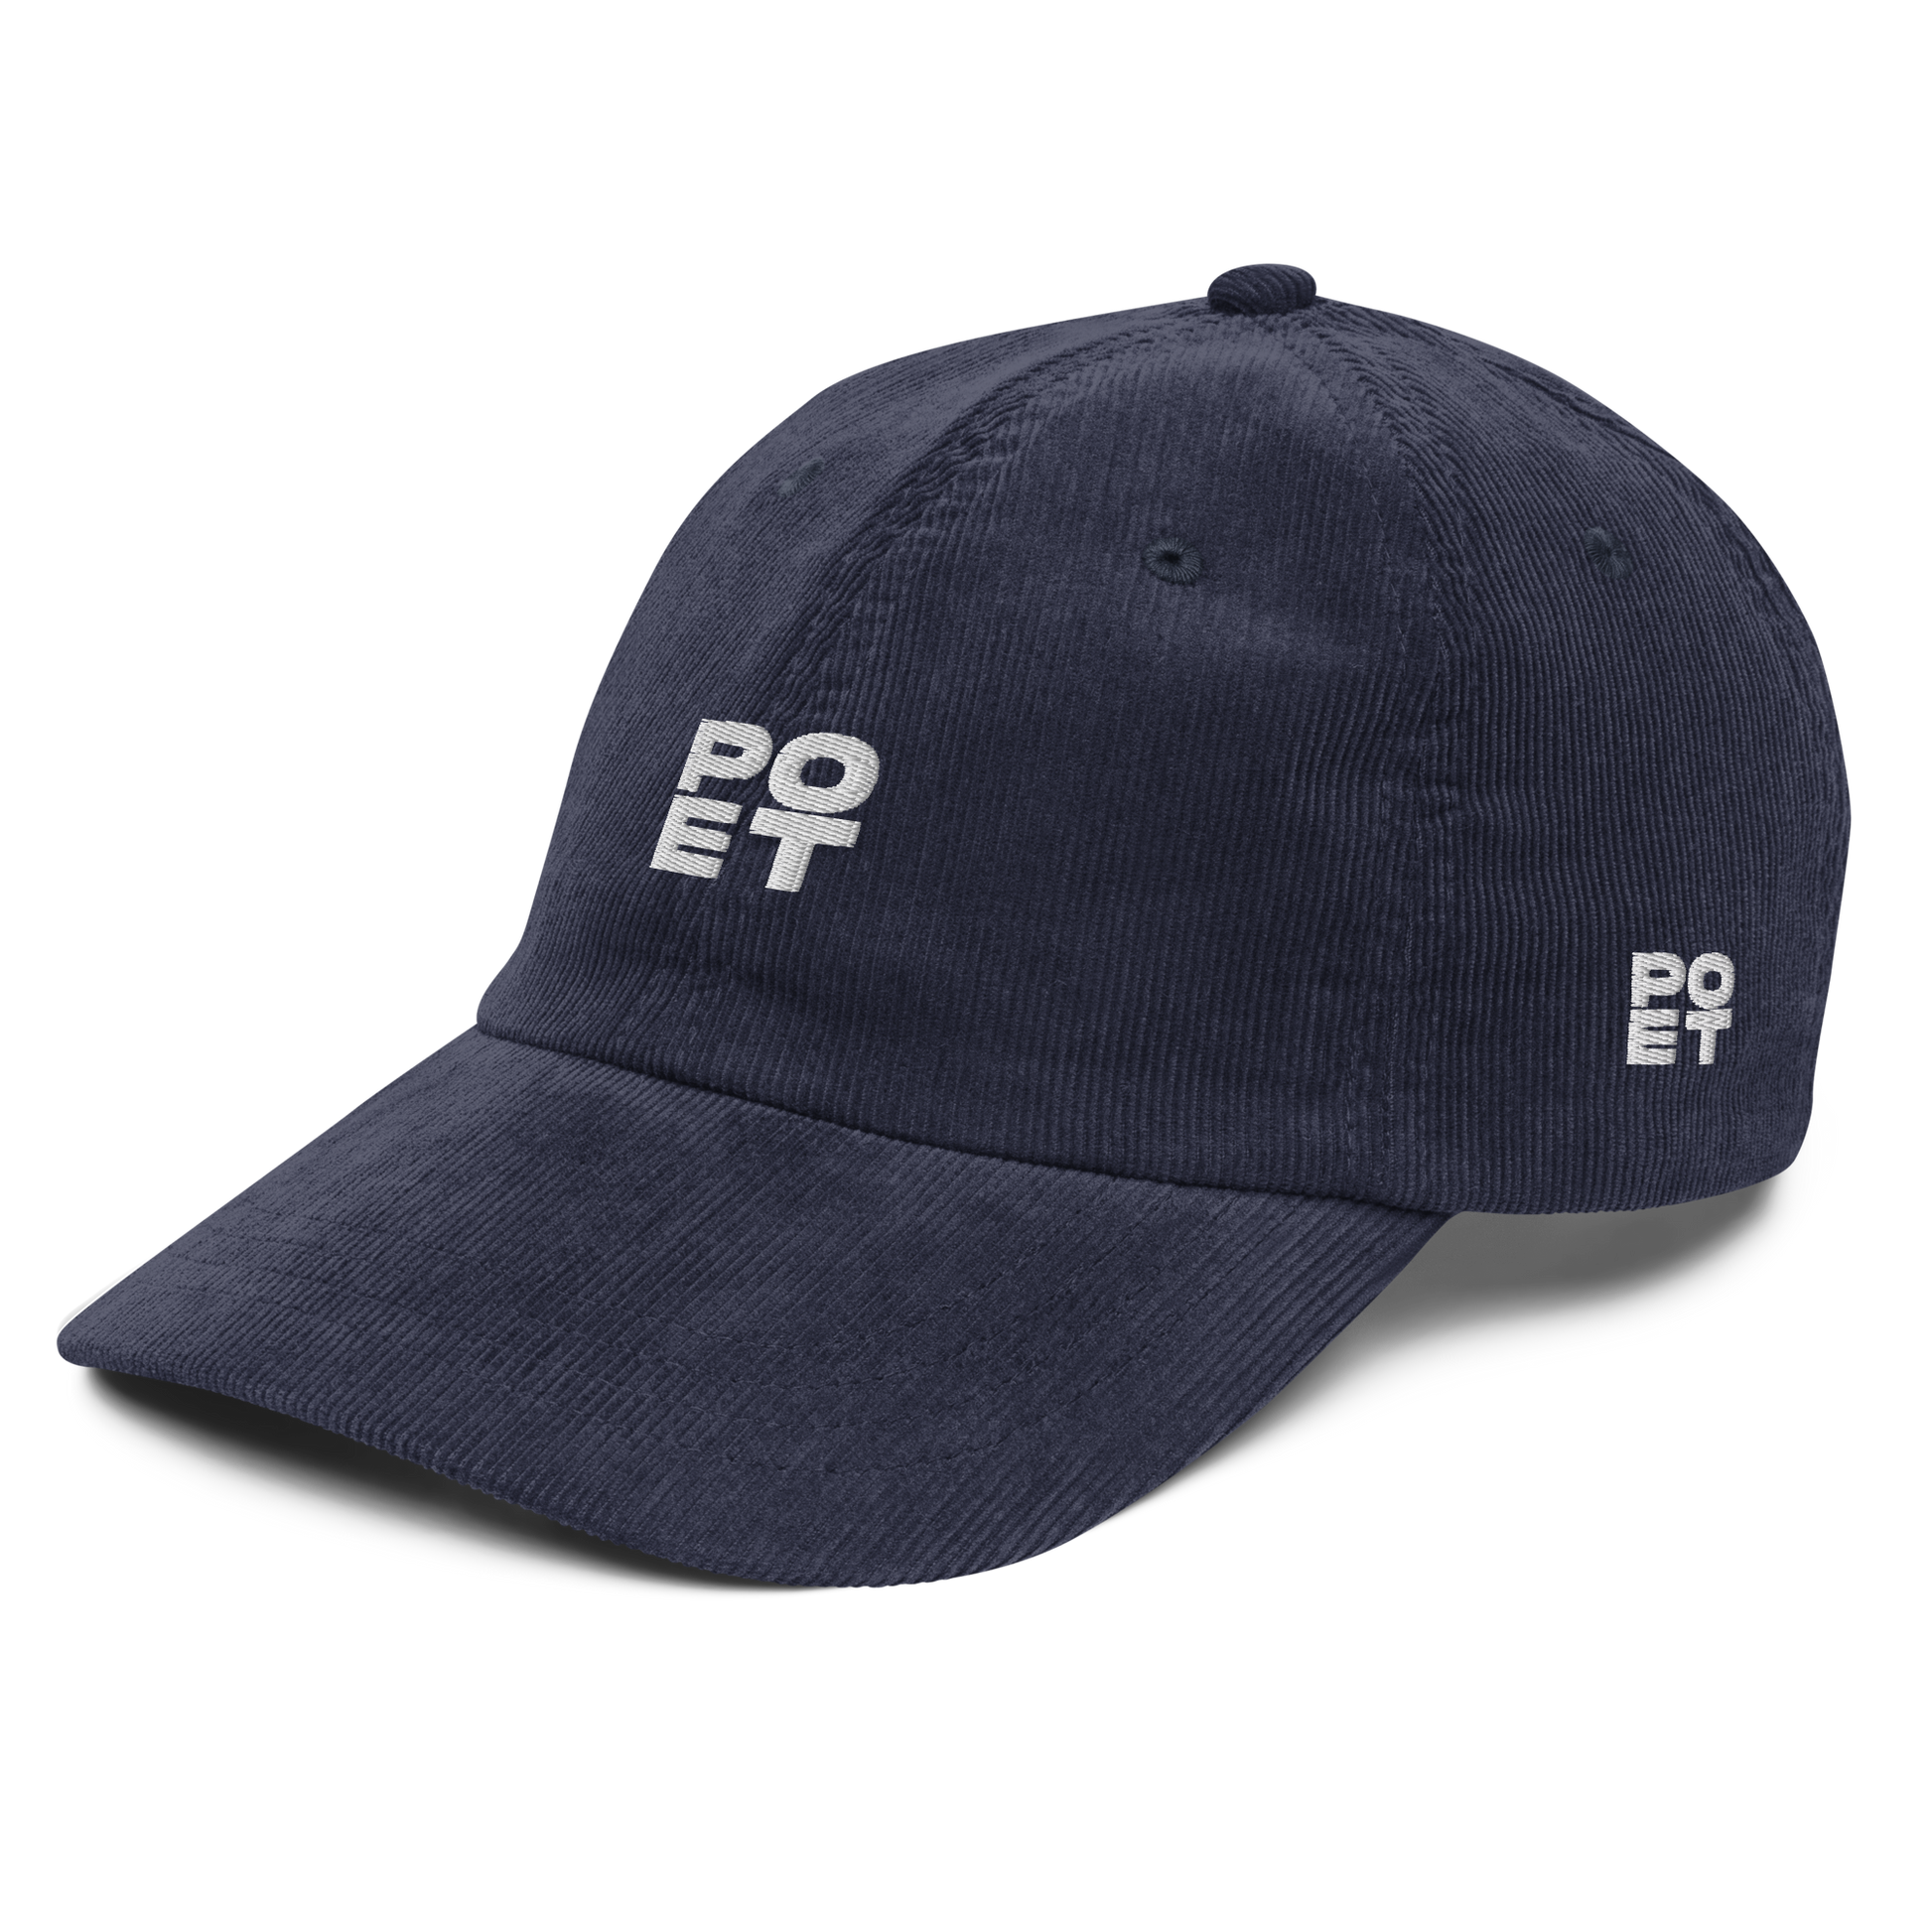 Corduroy embroidered cap - Poet Archives